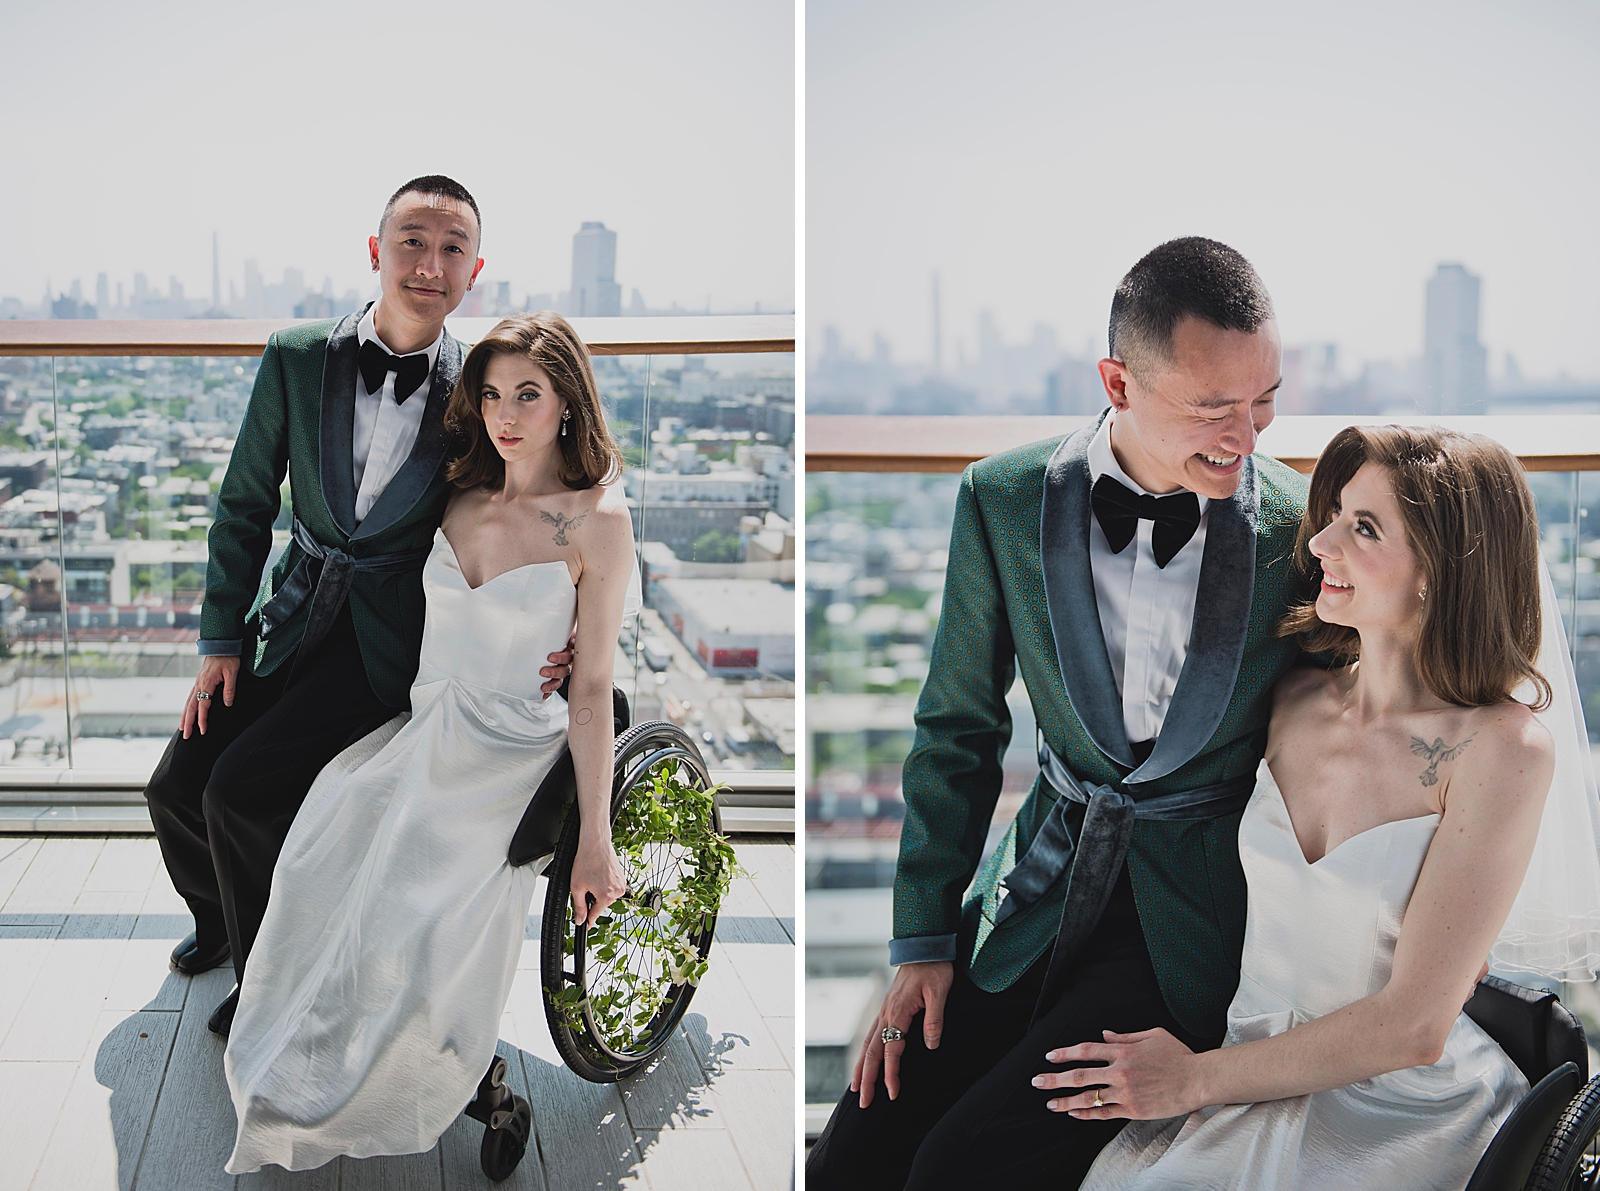 Left photo: Shot of the bride on a balcony with the groom perched on the side of her wheelchair. 
Right photo: Upper body shot of the bride and groom smiling at each other on a balcony.